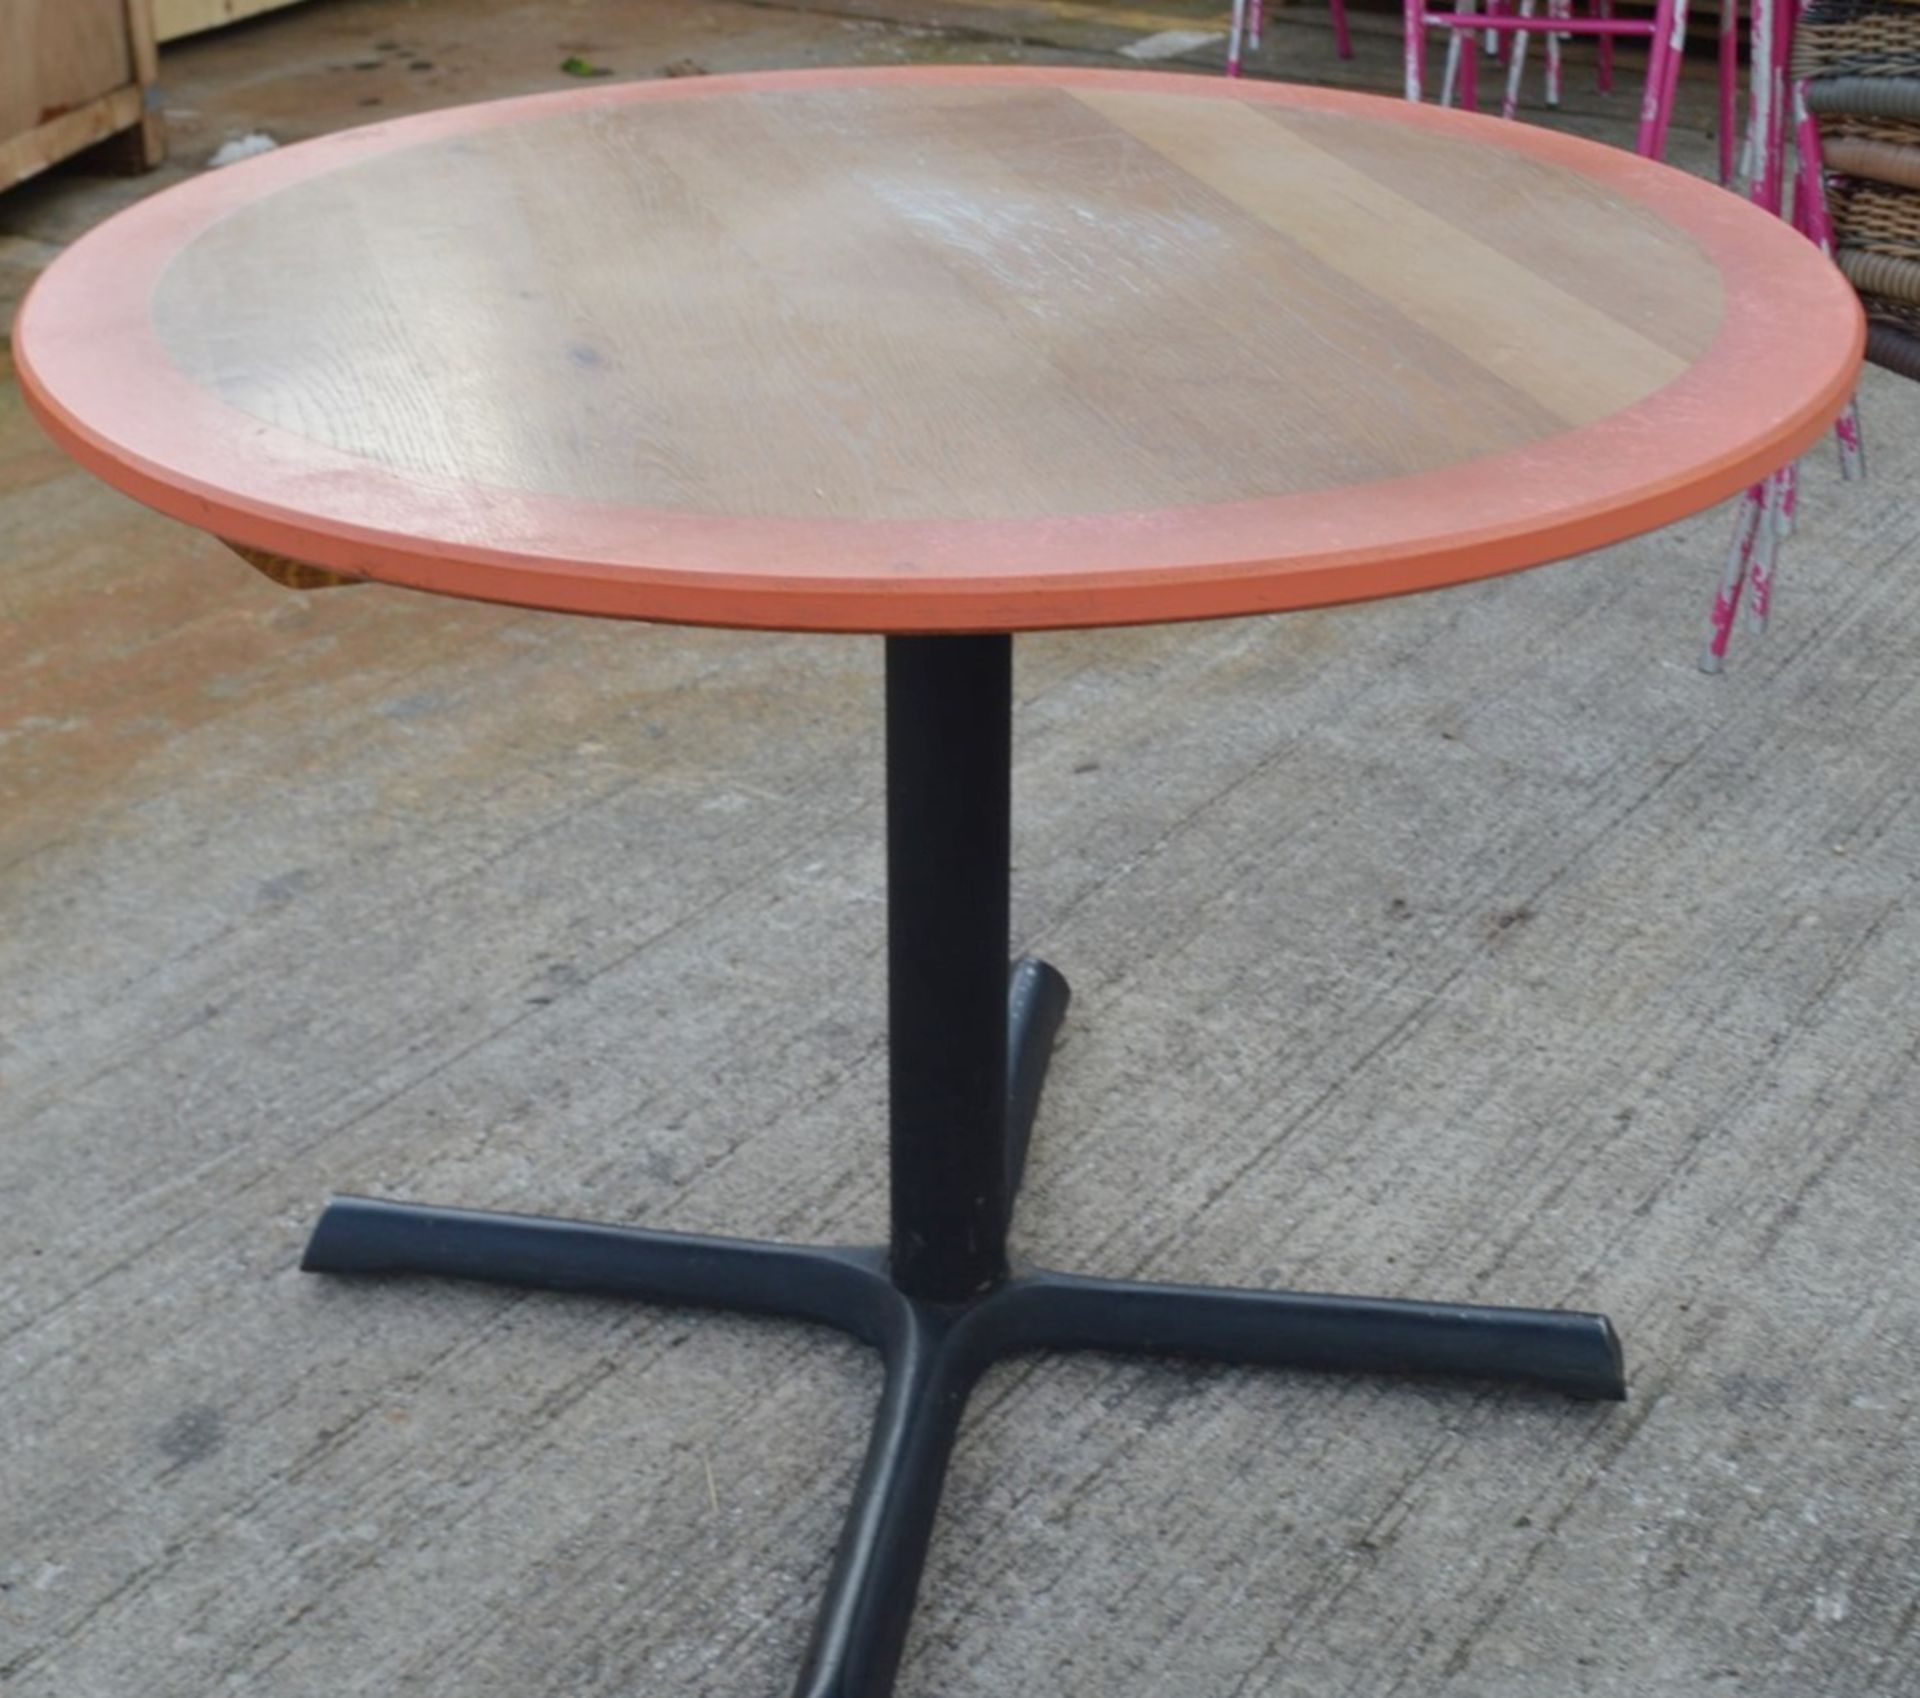 1 x Commercial 100cm Round Tables Featuring Abstract Paint Work And Metal Base - Dimensions: - Image 3 of 3